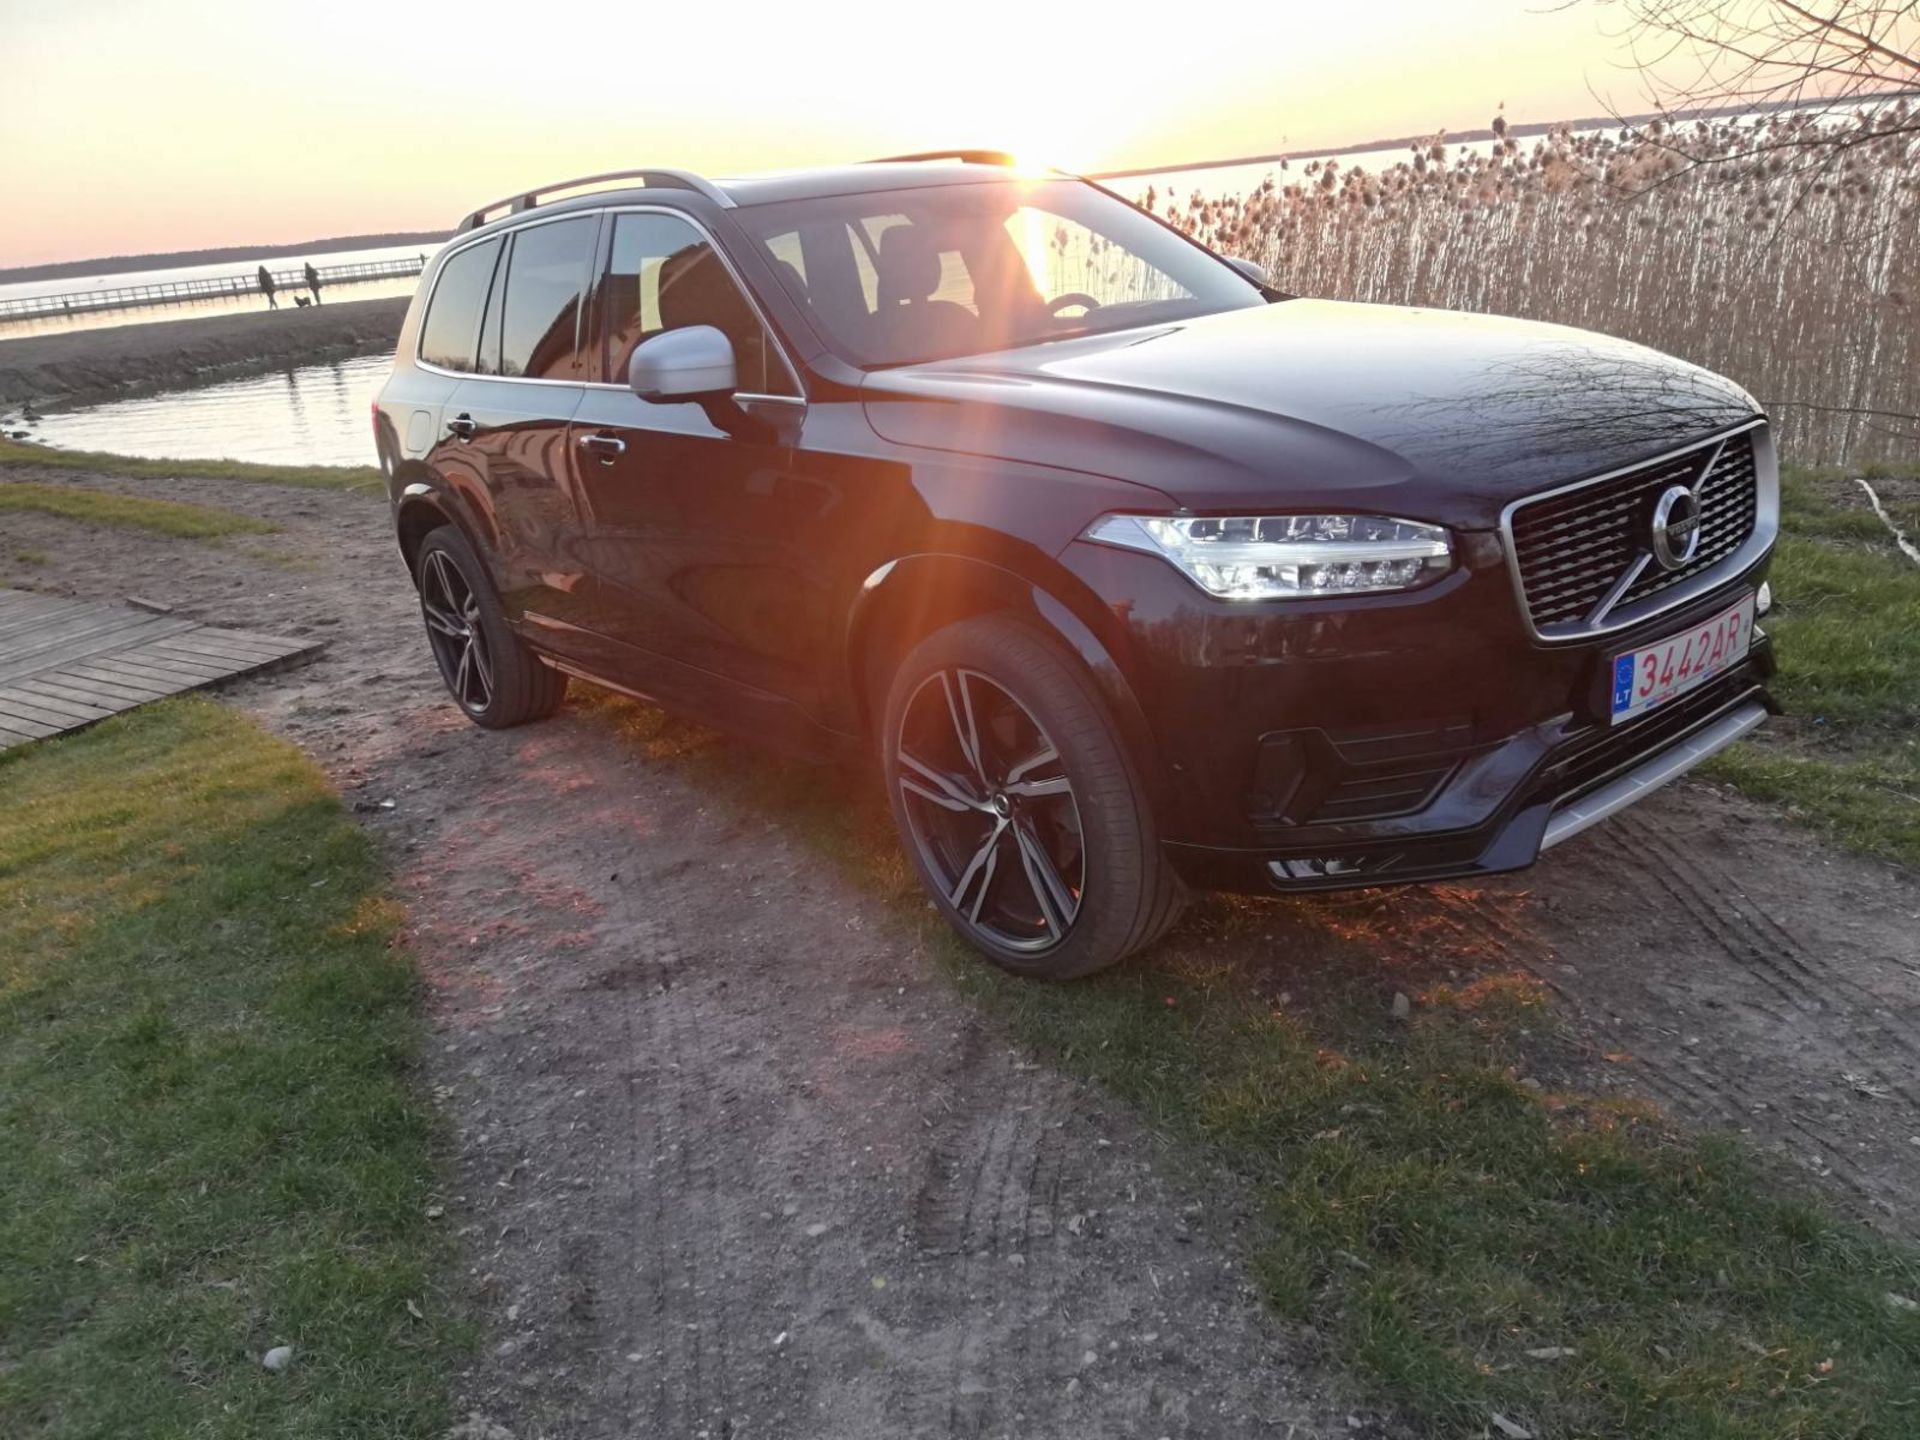 2017 VOLVO XC90 T6 AWD LEFT HAND DRIVE R-DESIGN 2.0L PETROL AUTOMATIC, 45,000 KM, DRIVES LIKE NEW - Image 9 of 20